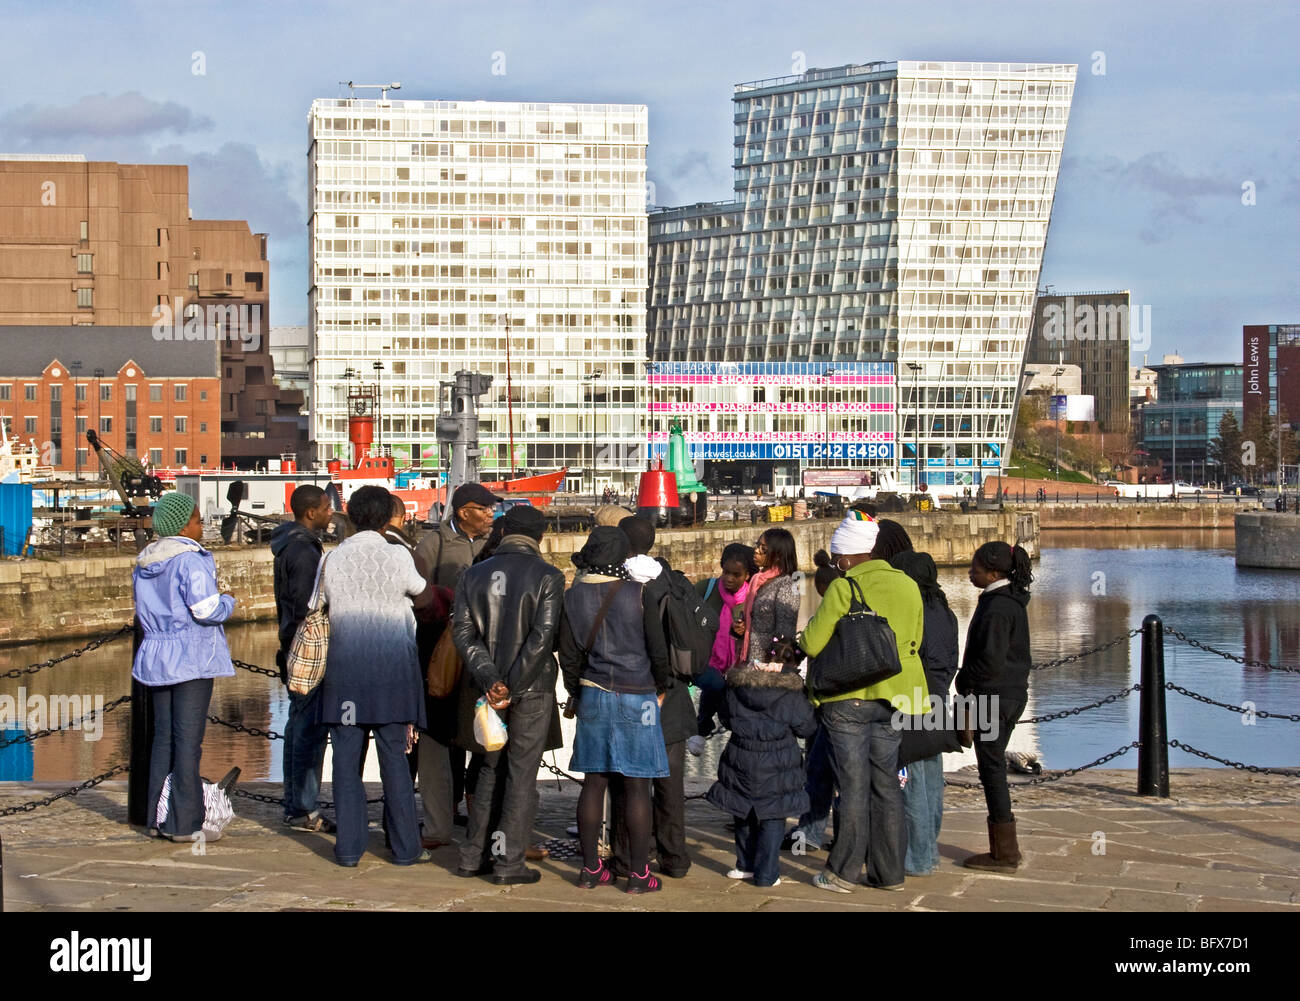 Visitors and Guide, Slave History Trail, Albert Dock, Liverpool, UK. Stock Photo